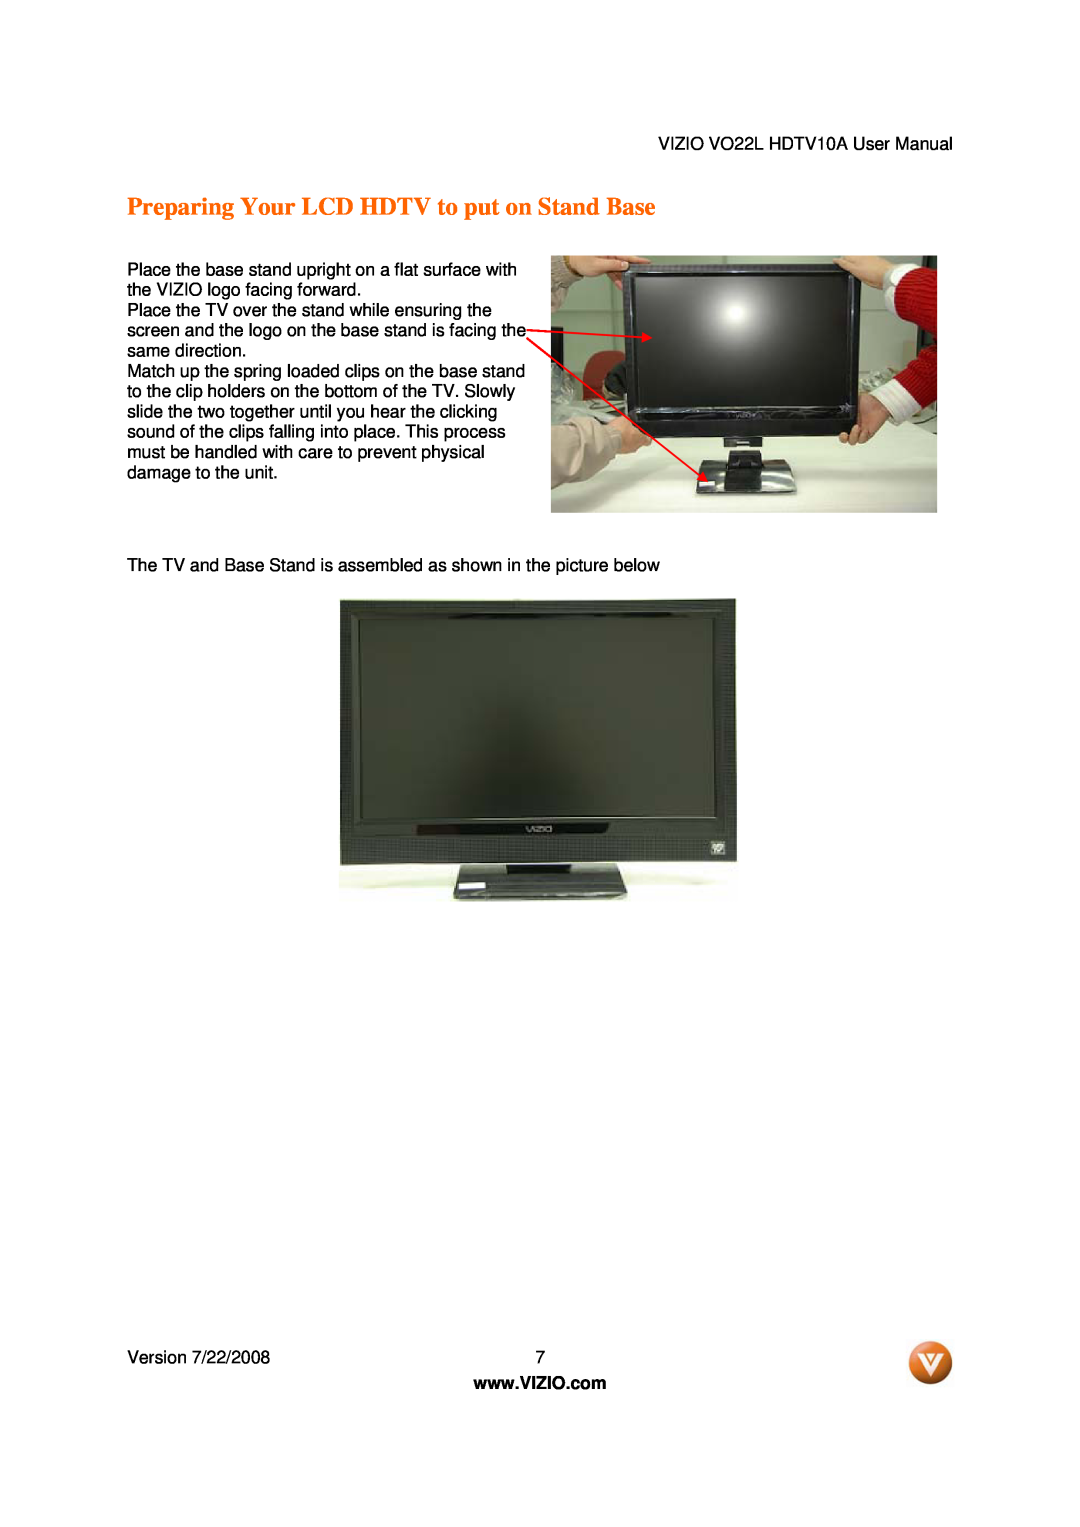 Vizio VO22L user manual Preparing Your LCD HDTV to put on Stand Base 